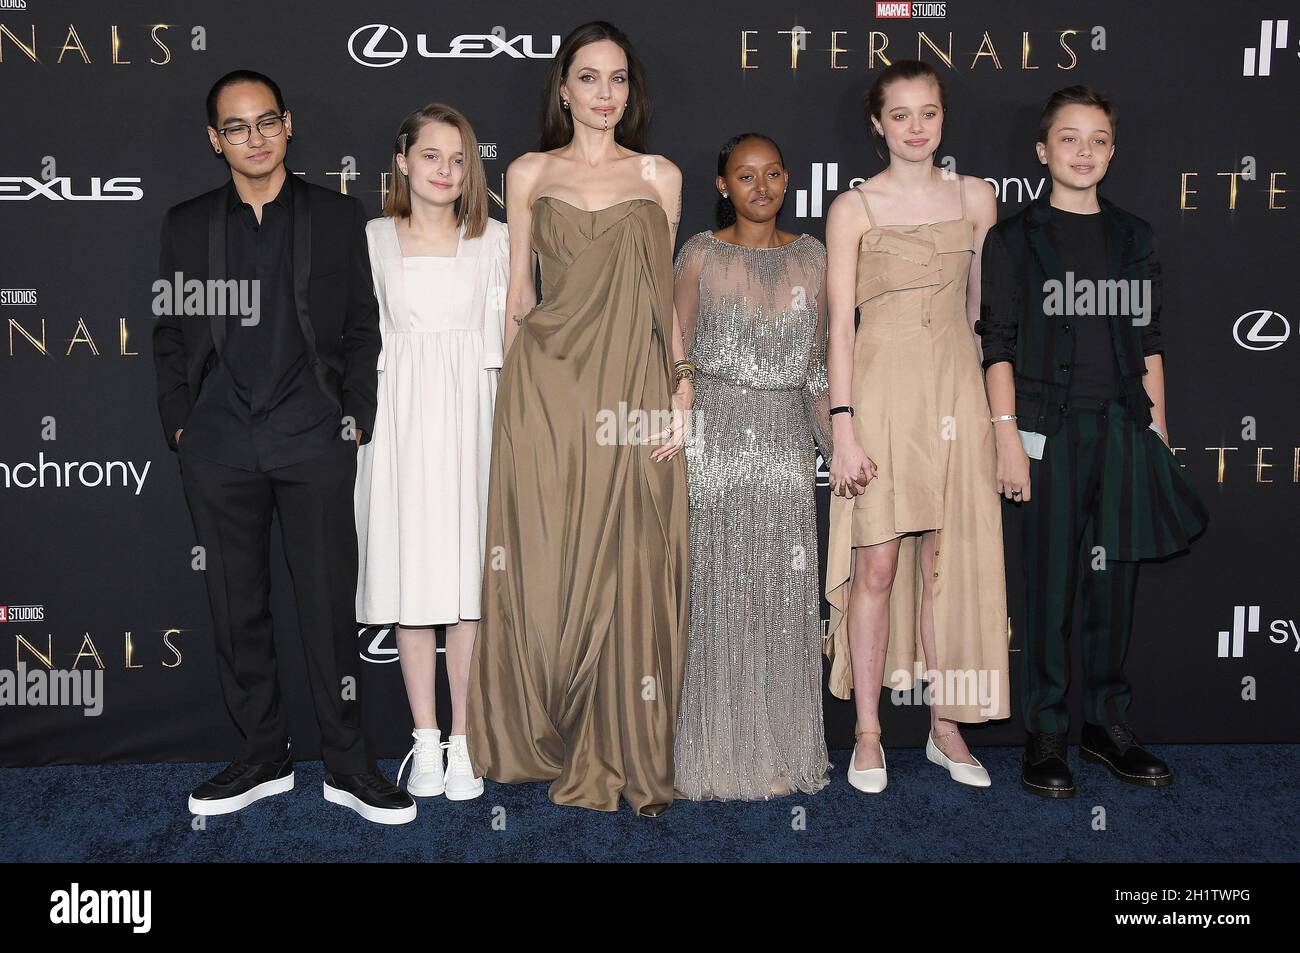 Los Angeles, USA. 18th Oct, 2021. (L-R) Maddox Jolie-Pitt, Vivienne Jolie-Pitt, Angelina Jolie, Zahara Jolie-Pitt, Shiloh Jolie-Pitt and Knox Jolie-Pitt at Marvel Studios' ETERNALS Los Angeles Premiere held at The DolbyTheater in Hollywood, CA on Monday, ?October 18, 2021. (Photo By Sthanlee B. Mirador/Sipa USA) Credit: Sipa USA/Alamy Live News Stock Photo